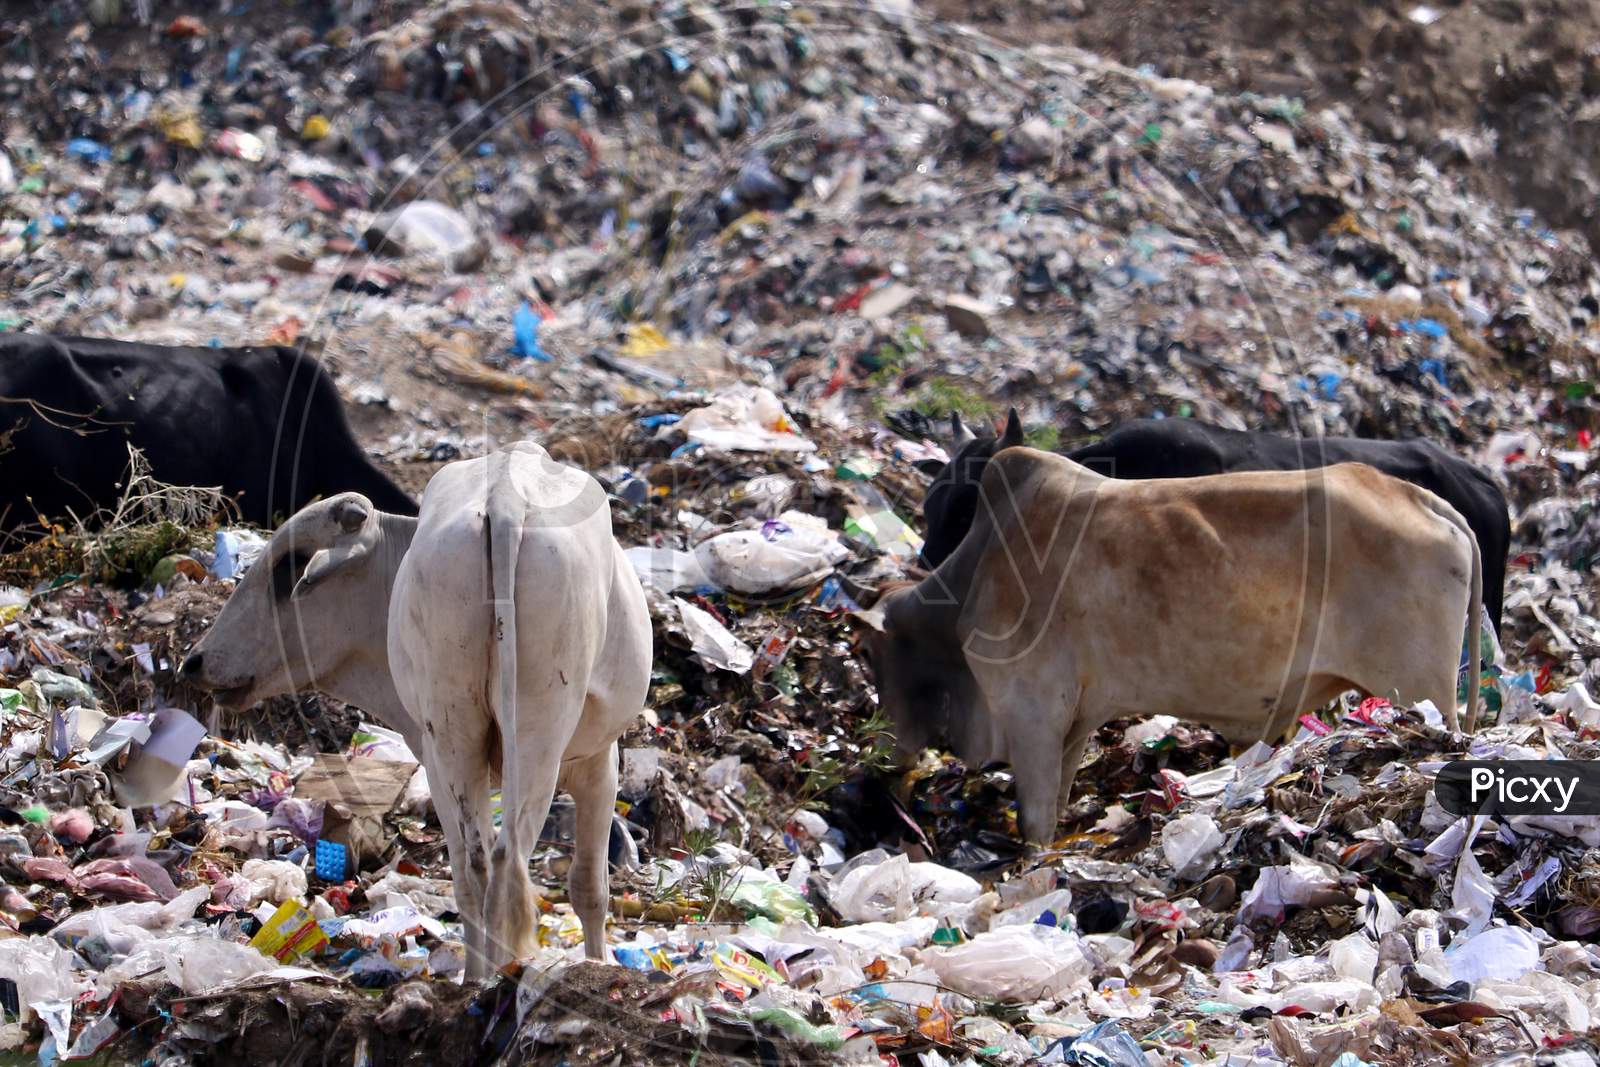 Cows and Bulls fetch for food At A Garbage Dump On The Eve Of World Environment Day In Ajmer, Rajasthan, India On 04 June 2020.